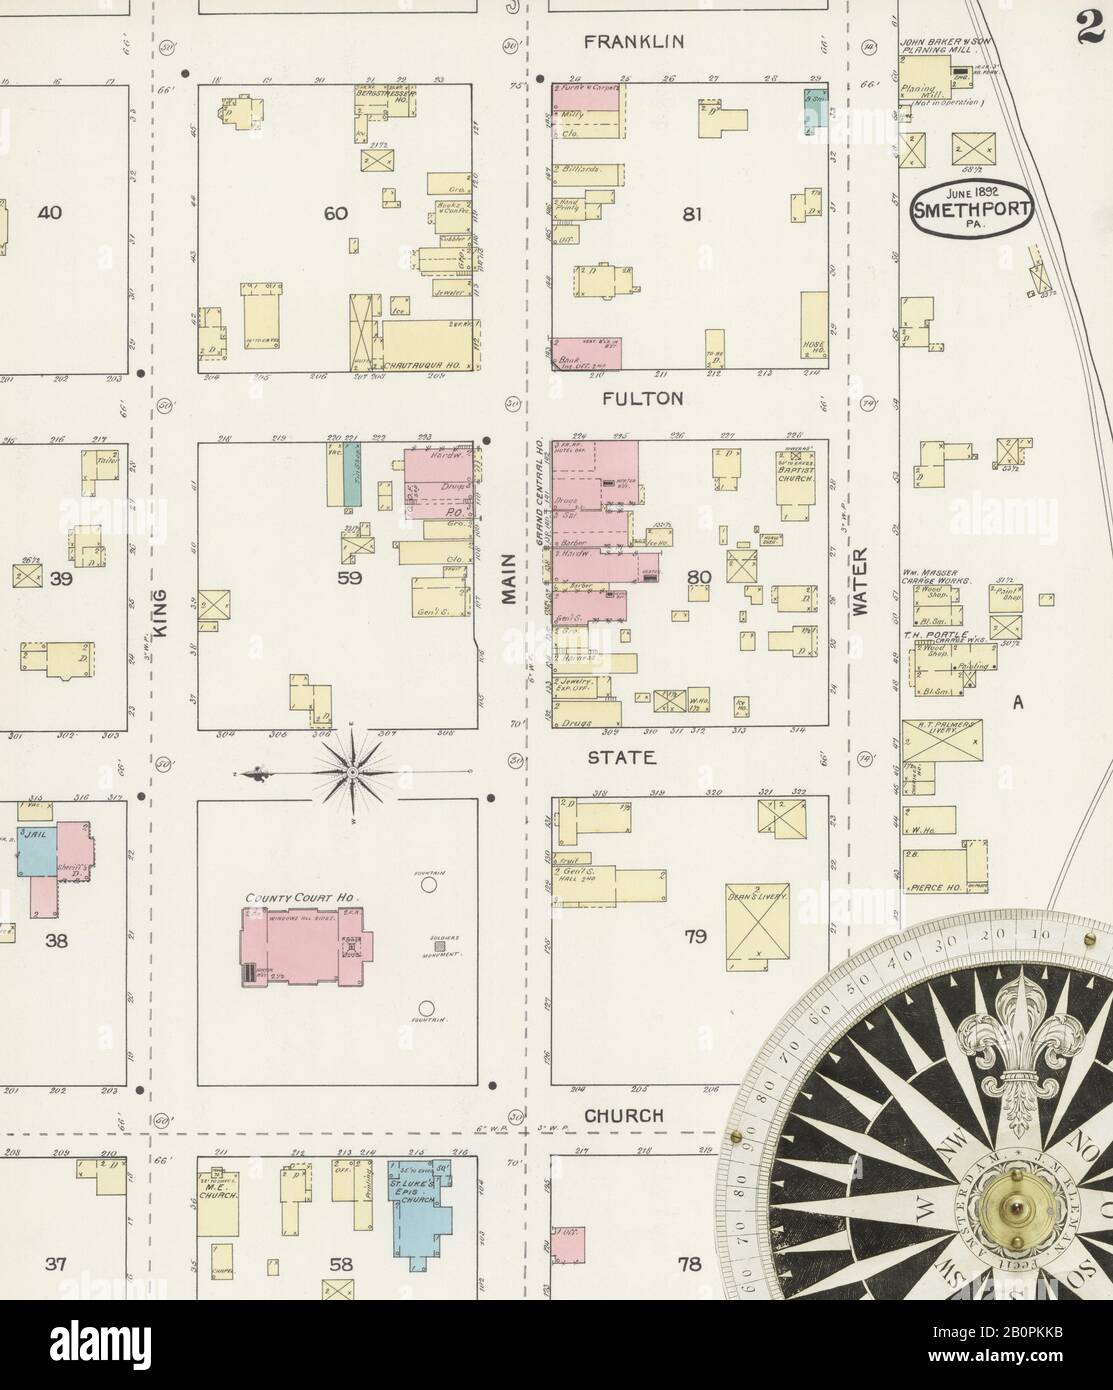 Image 2 of Sanborn Fire Insurance Map from Smethport, McKean County, Pennsylvania. Jun 1892. 3 Sheet(s). Includes East Smethport, America, street map with a Nineteenth Century compass Stock Photo